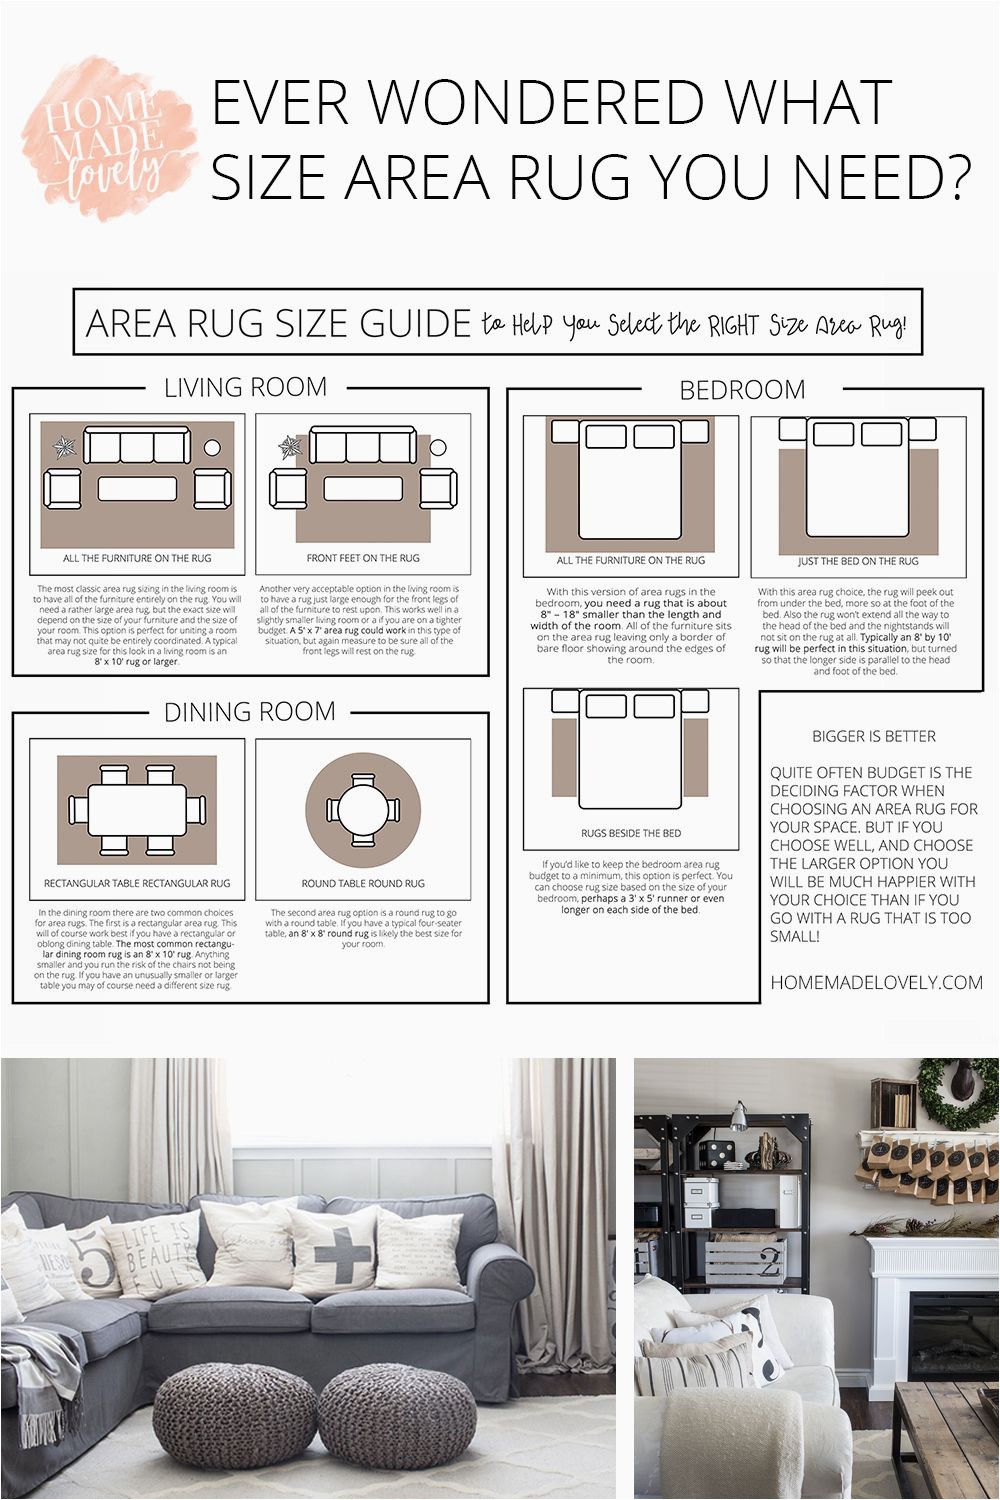 Large area Rugs at Big Lots area Rug Size Guide to Help You Select the Right Size area